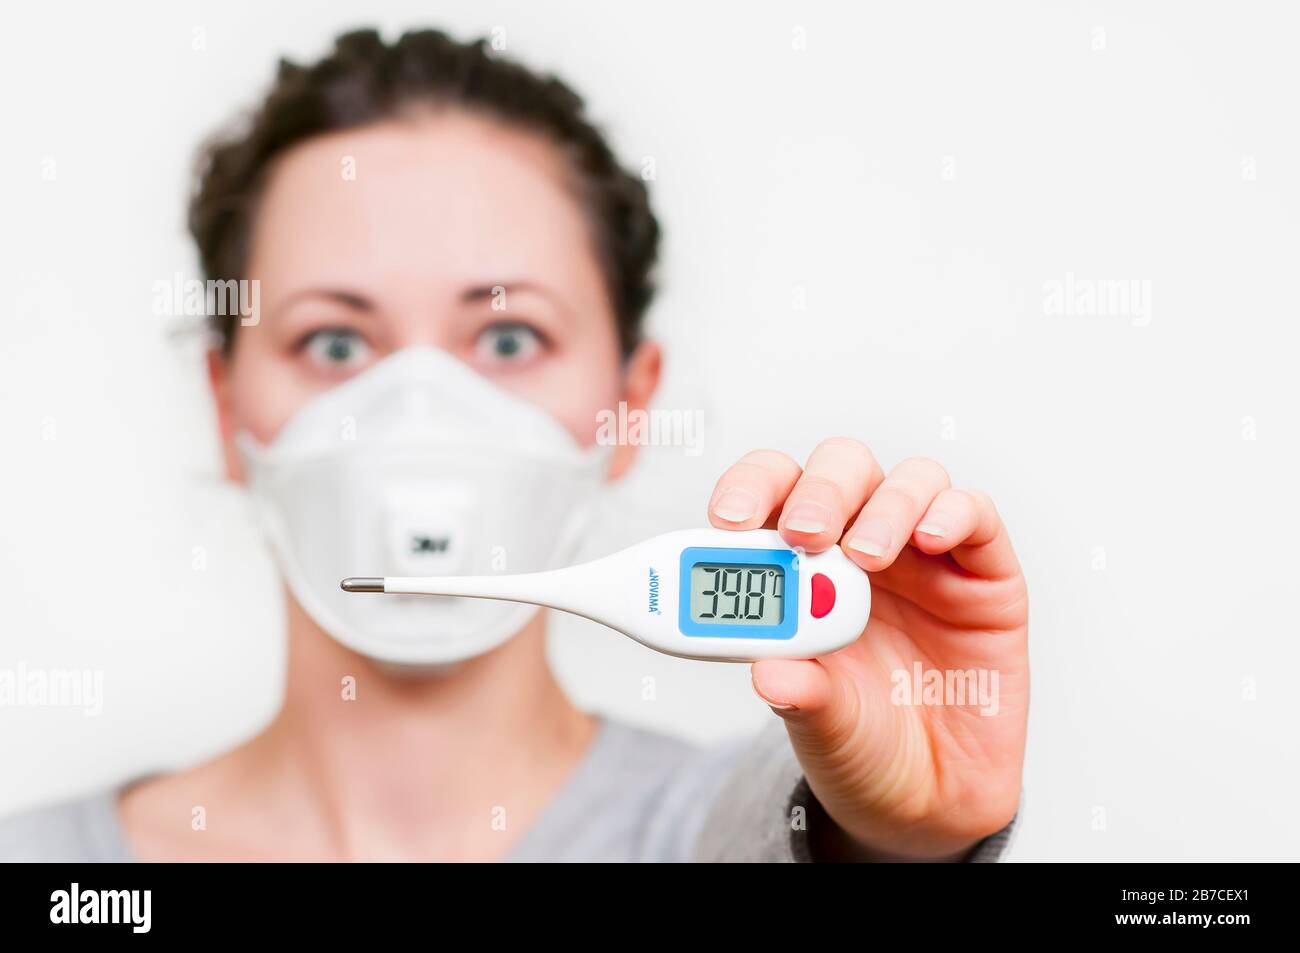 caucasian brunette woman in protective medical mask on face SARS-CoV-2, Coronavirus, COVID-19. with electric, digital thermomether. white background. Stock Photo